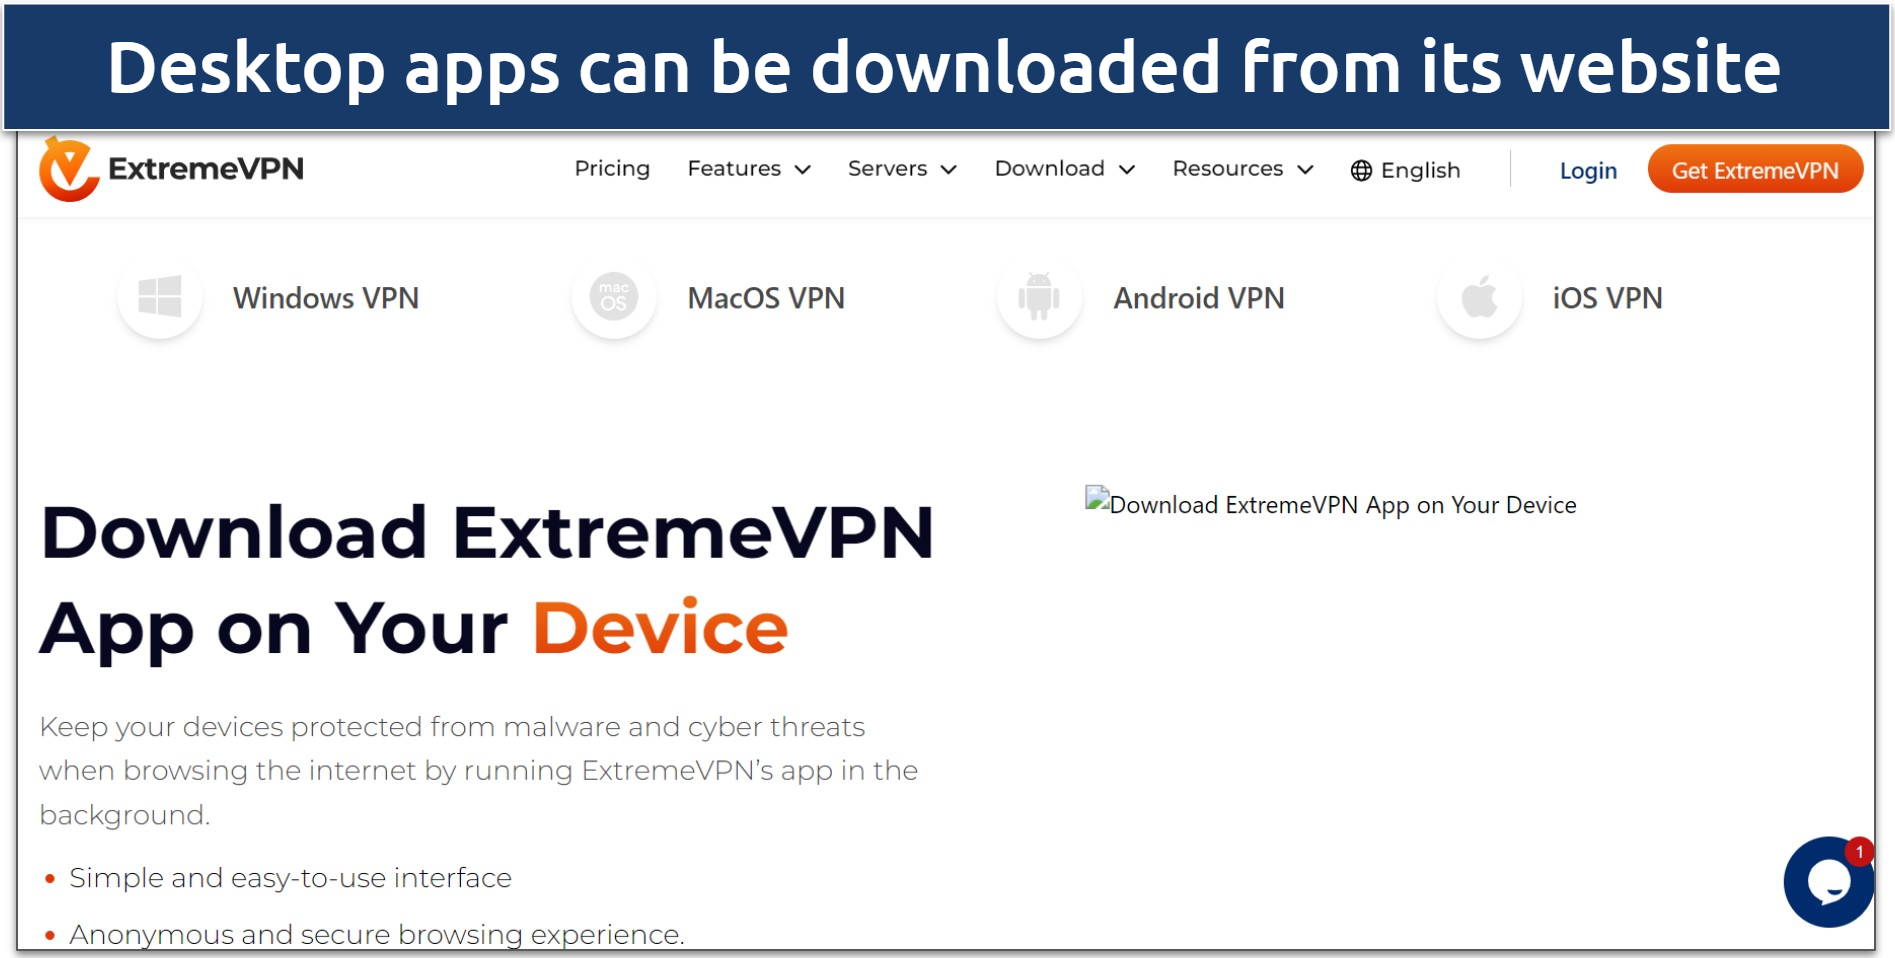 Screenshot of ExtremeVPN's download page